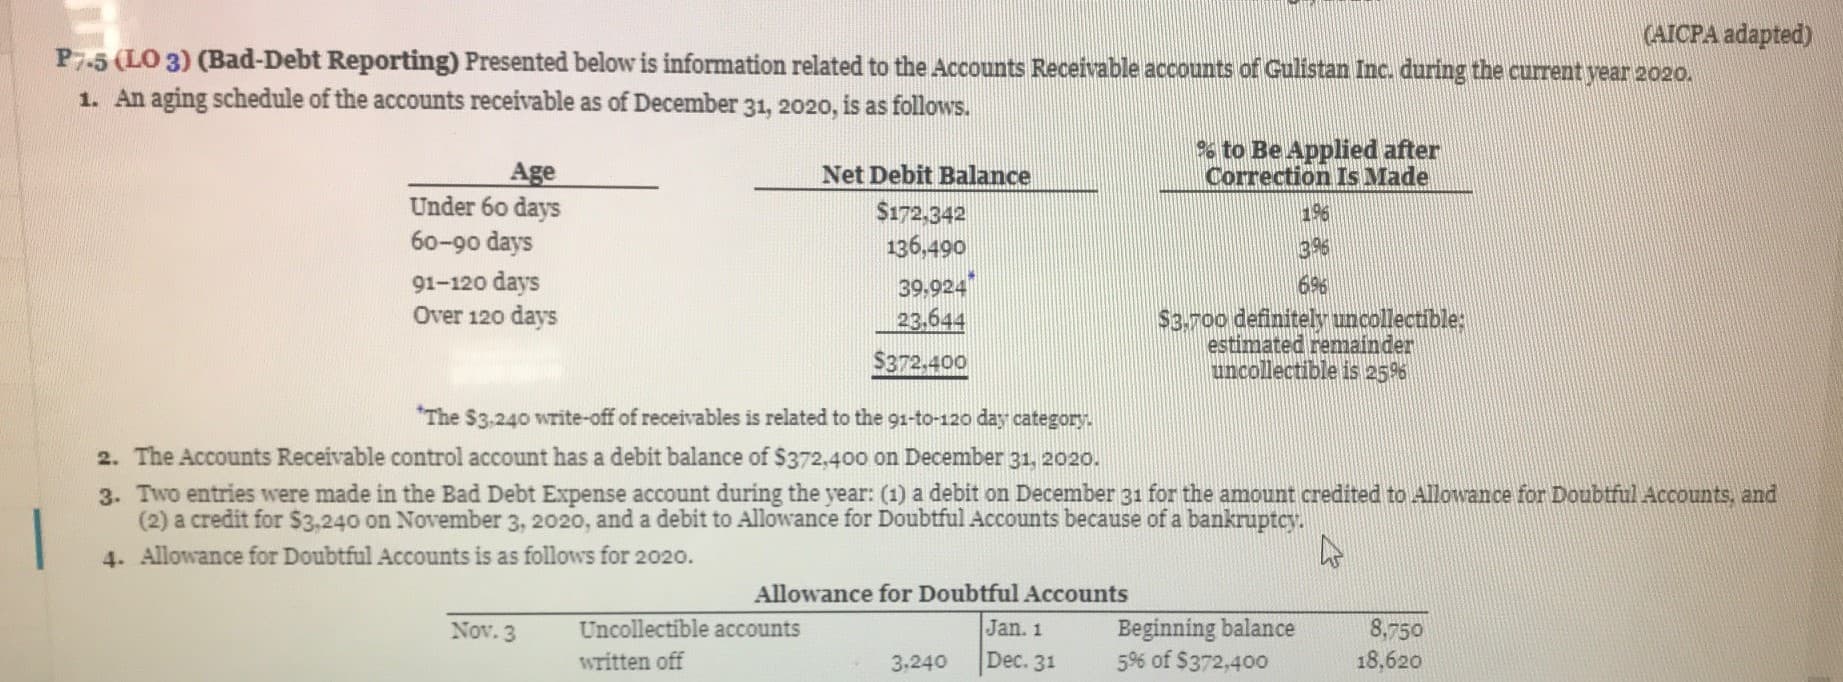 (AICPA adapted)
P7-5 (LO 3) (Bad-Debt Reporting) Presented below is information related to the Accounts Receivable accounts of Gulistan Inc. during the current year 2020.
1. An aging schedule of the accounts receivable as of December 31, 2020, is as follows.
Age
Under 60 days
60-90 days
% to Be Applied after
Correction Is Made
196
3%
Net Debit Balance
$172,342
136,490
39,924
23.644
69%6
91-120 days
Over 120 days
S3-700 definitely uncollectible;
estimated remainder
$372.400
uncollectible is 25%
*The $3.240 write-off of receivables is related to the 91-to-120 day category.
2. The Accounts Receivable control account has a debit balance of $372,40oo on December 31, 2020.
3. Two entries were made in the Bad Debt Expense account during the year: (1) a debit on December 31 for the amount credited to Allowance for Doubtful Accounts, and
(2) a credit for $3,240 on November 3, 2020, and a debit to Allowance for Doubtful Accounts because of a bankruptcy.
4. Allowance for Doubtful Accounts is as follows for 2020.
Allowance for Doubtful Accounts
Jan. 1
Dec. 31
Beginning balance
5% of $372,400
8,750
18,620
Nov. 3
Uncollectible accounts
written off
3,240
